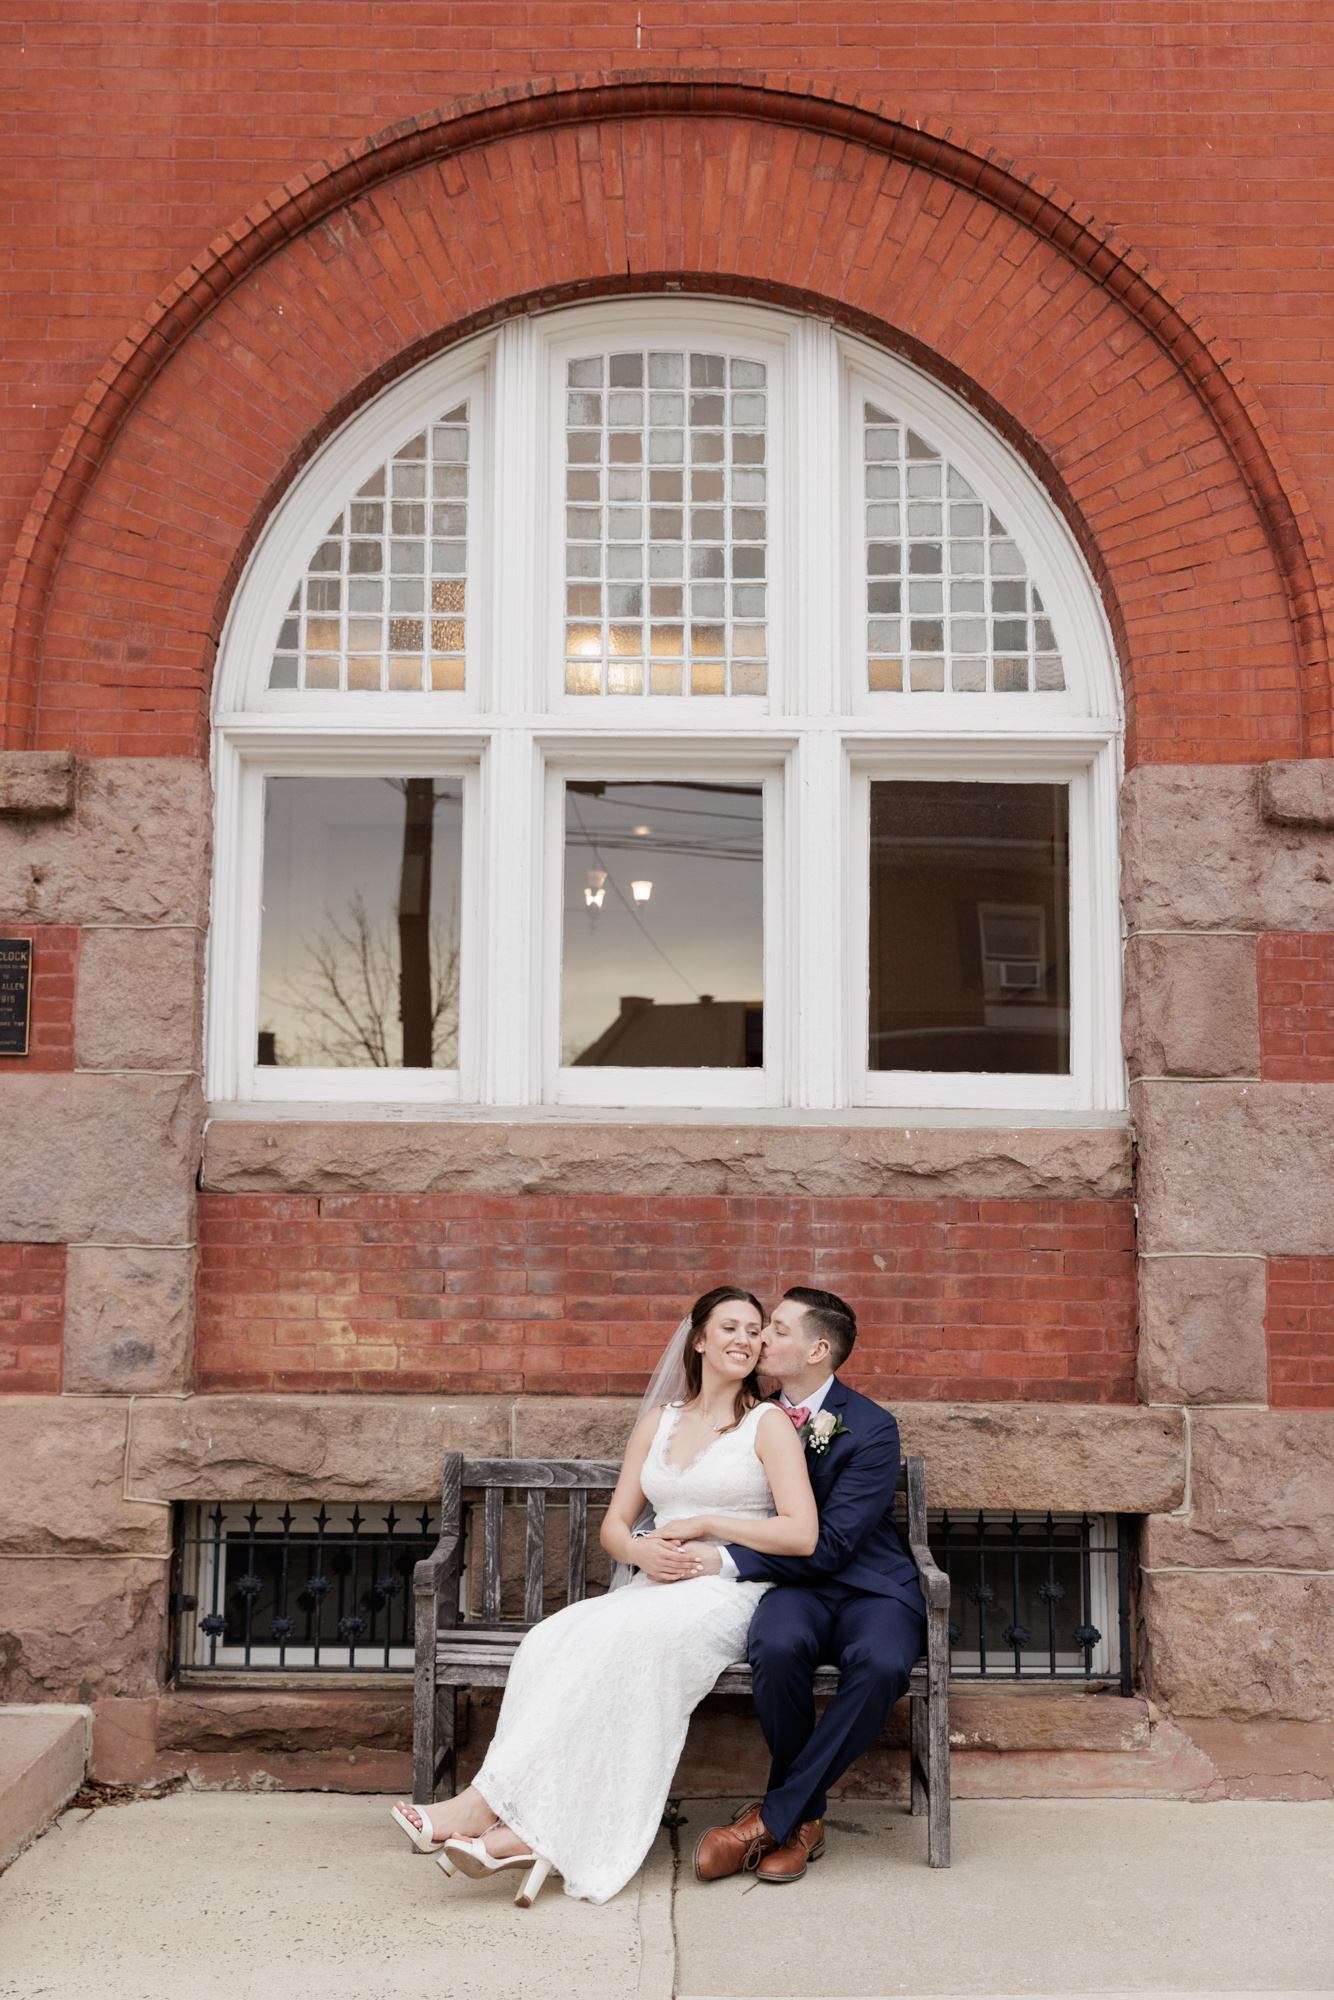 Elegant bride and groom embrace on a bench under an historic arched window at Old City Hall in Bordentown, NJ